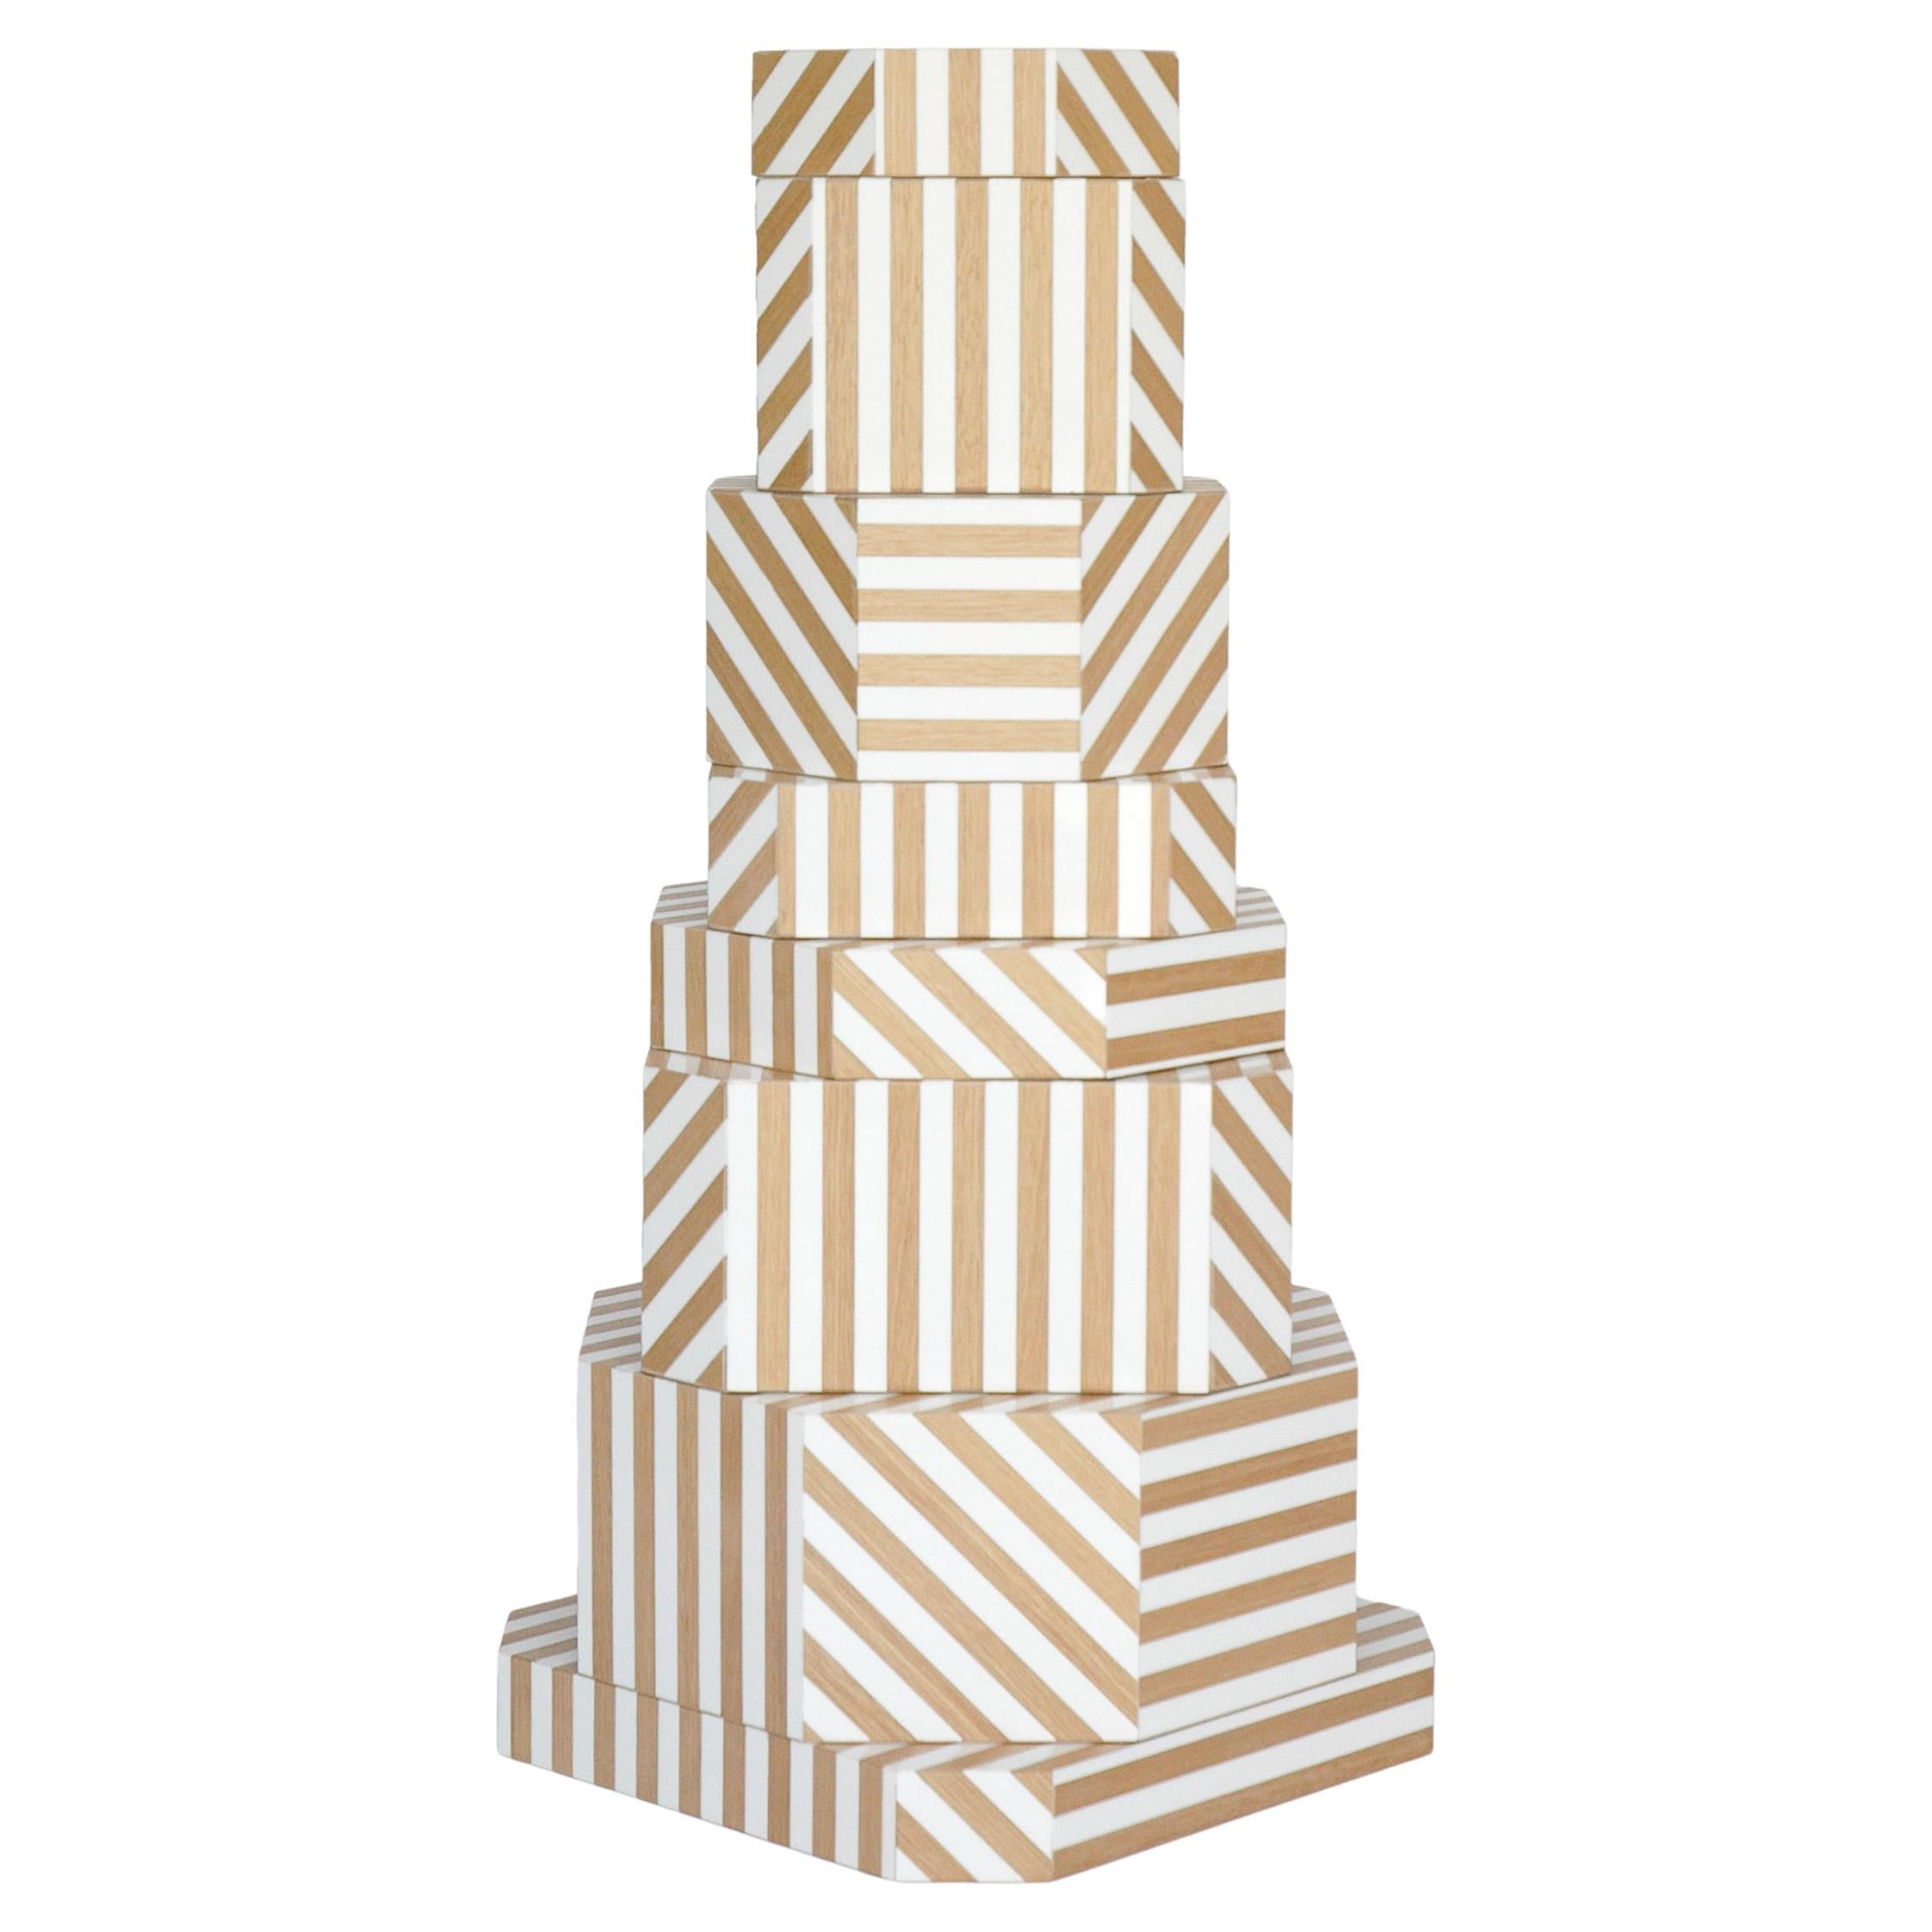 Natural Stripes Ziggurat Boxes by Oeuffice